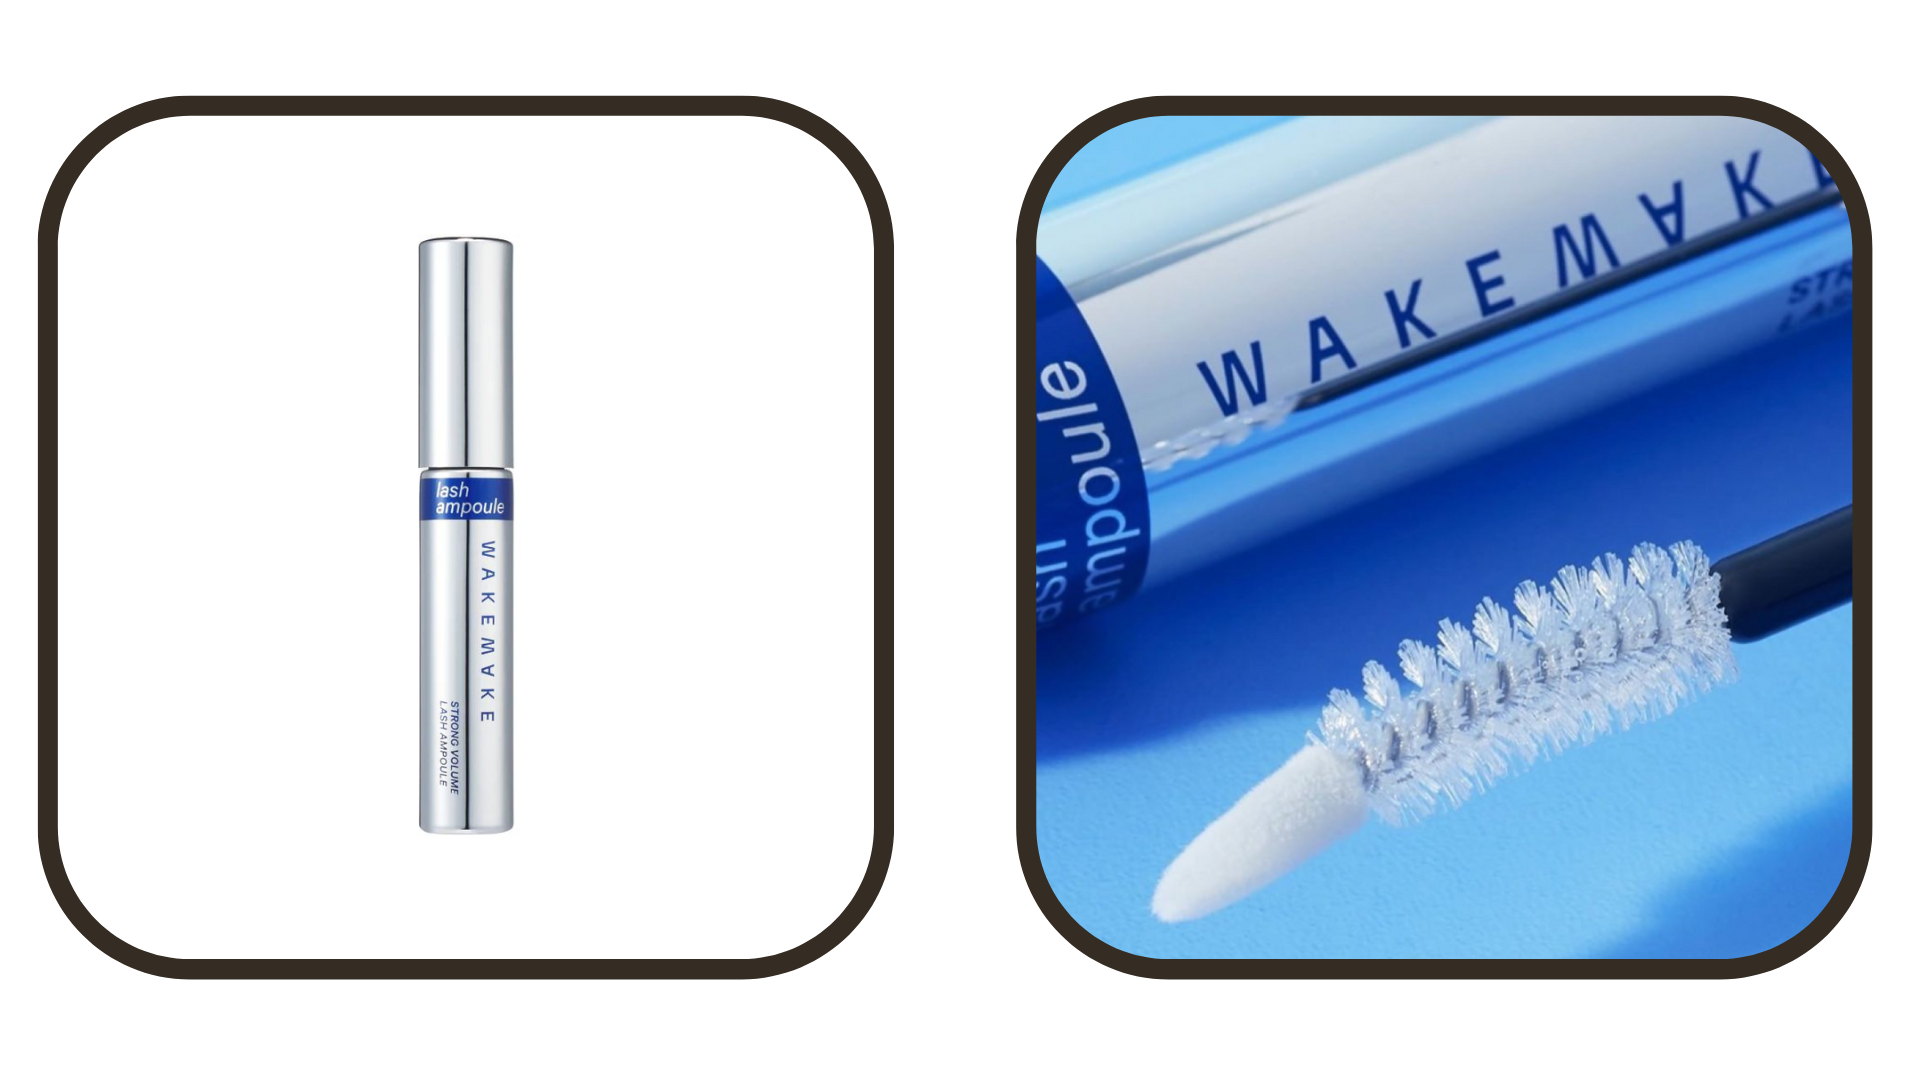 WAKEMAKE Strong Volume Lash Ampoule 7.5g